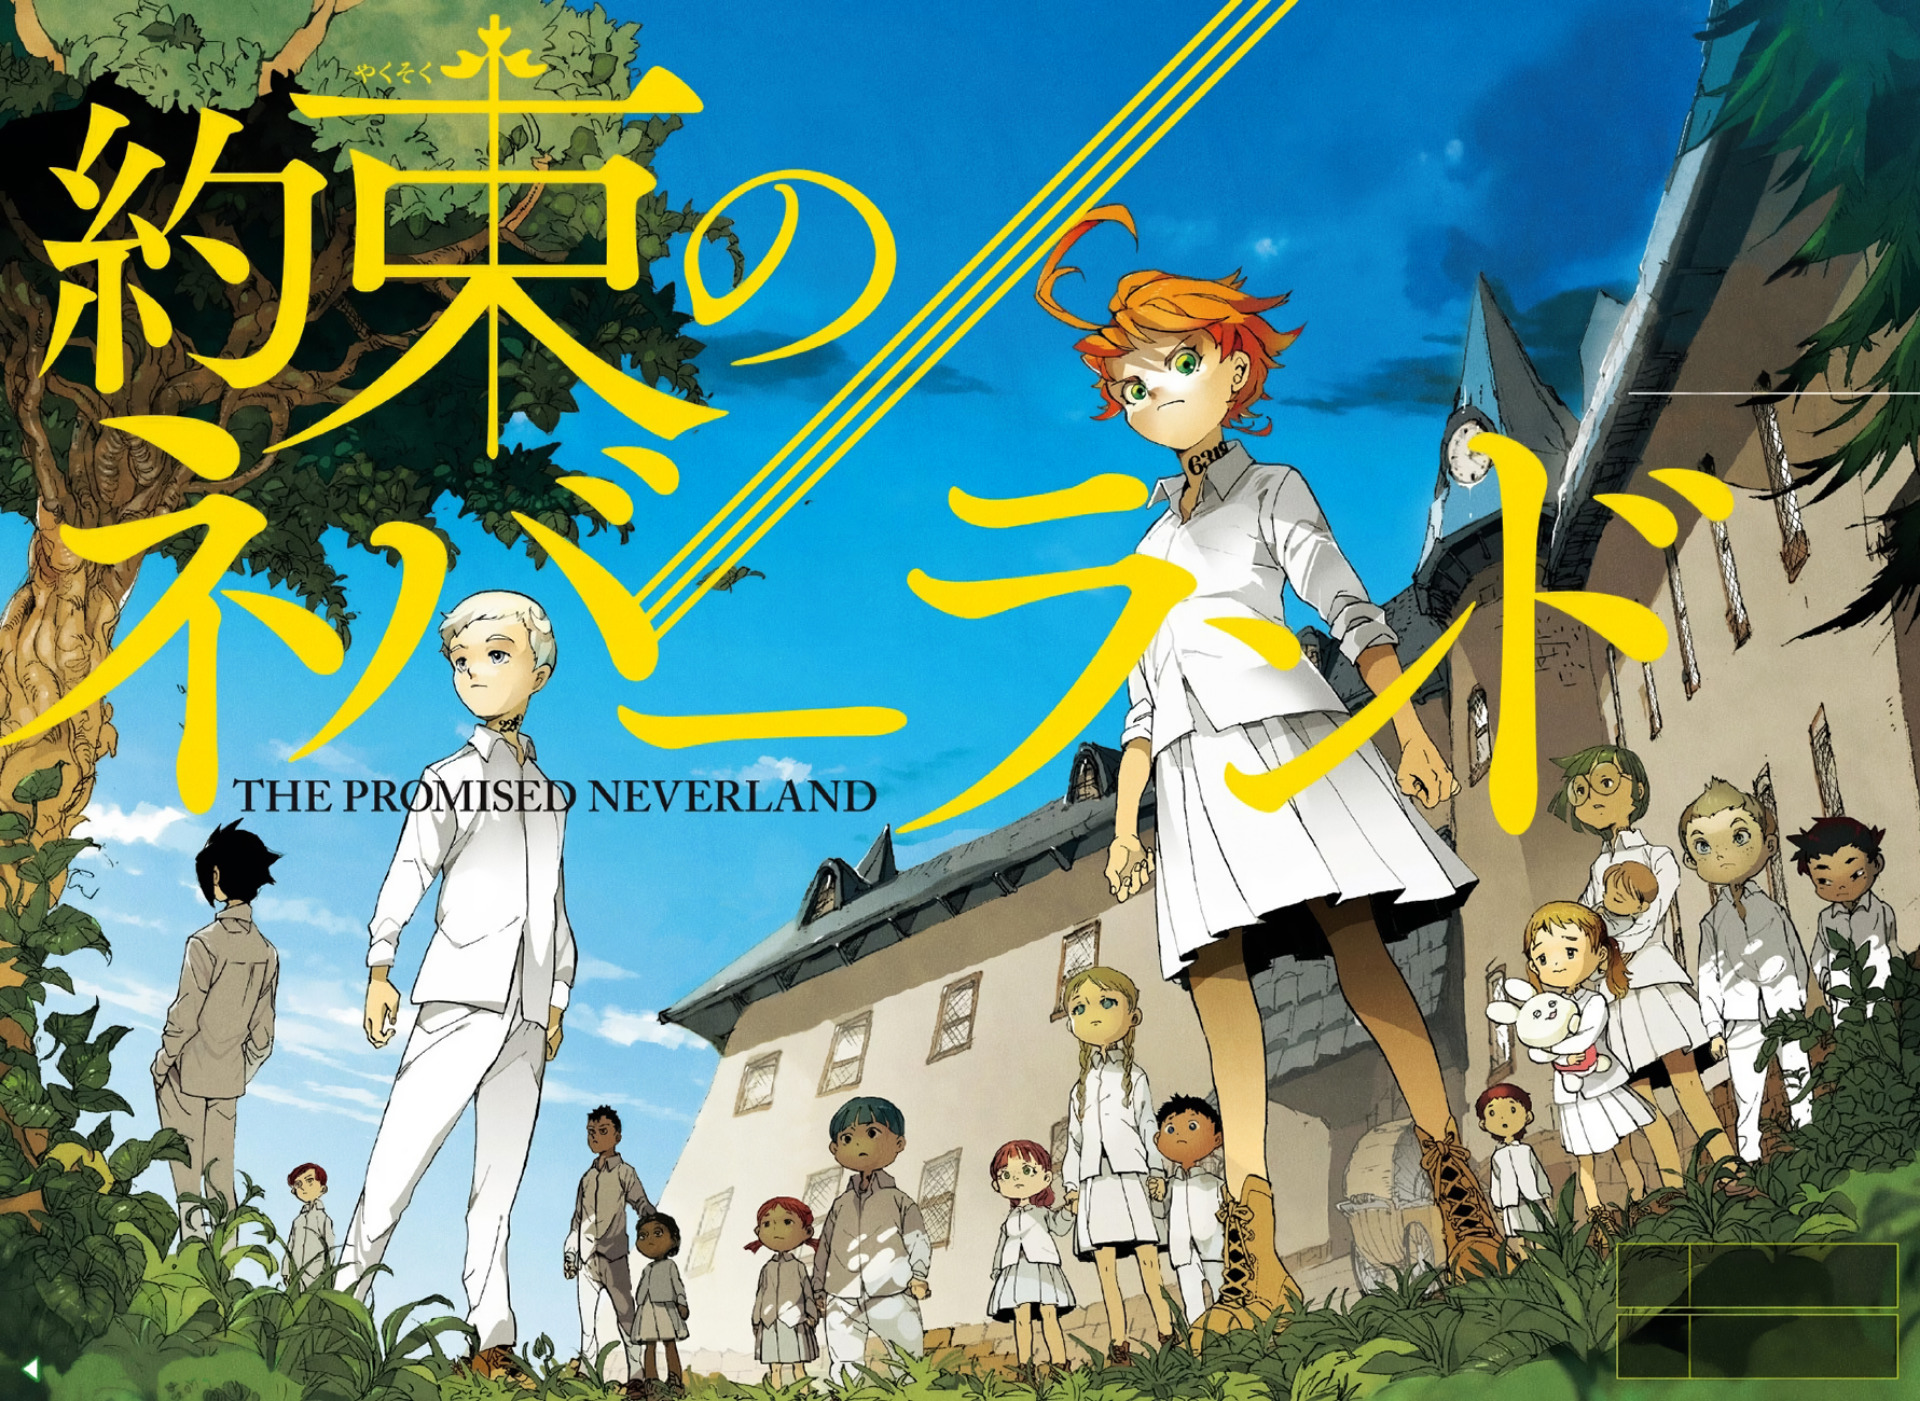 anime, the promised neverland, anna (the promised neverland), carol (the promised neverland), cedi (the promised neverland), conny (the promised neverland), don (the promised neverland), emma (the promised neverland), gilda (the promised neverland), lani (the promised neverland), mark (the promised neverland), naila (the promised neverland), nat (the promised neverland), norman (the promised neverland), phil (the promised neverland), ray (the promised neverland), shelly (the promised neverland), thoma (the promised neverland)